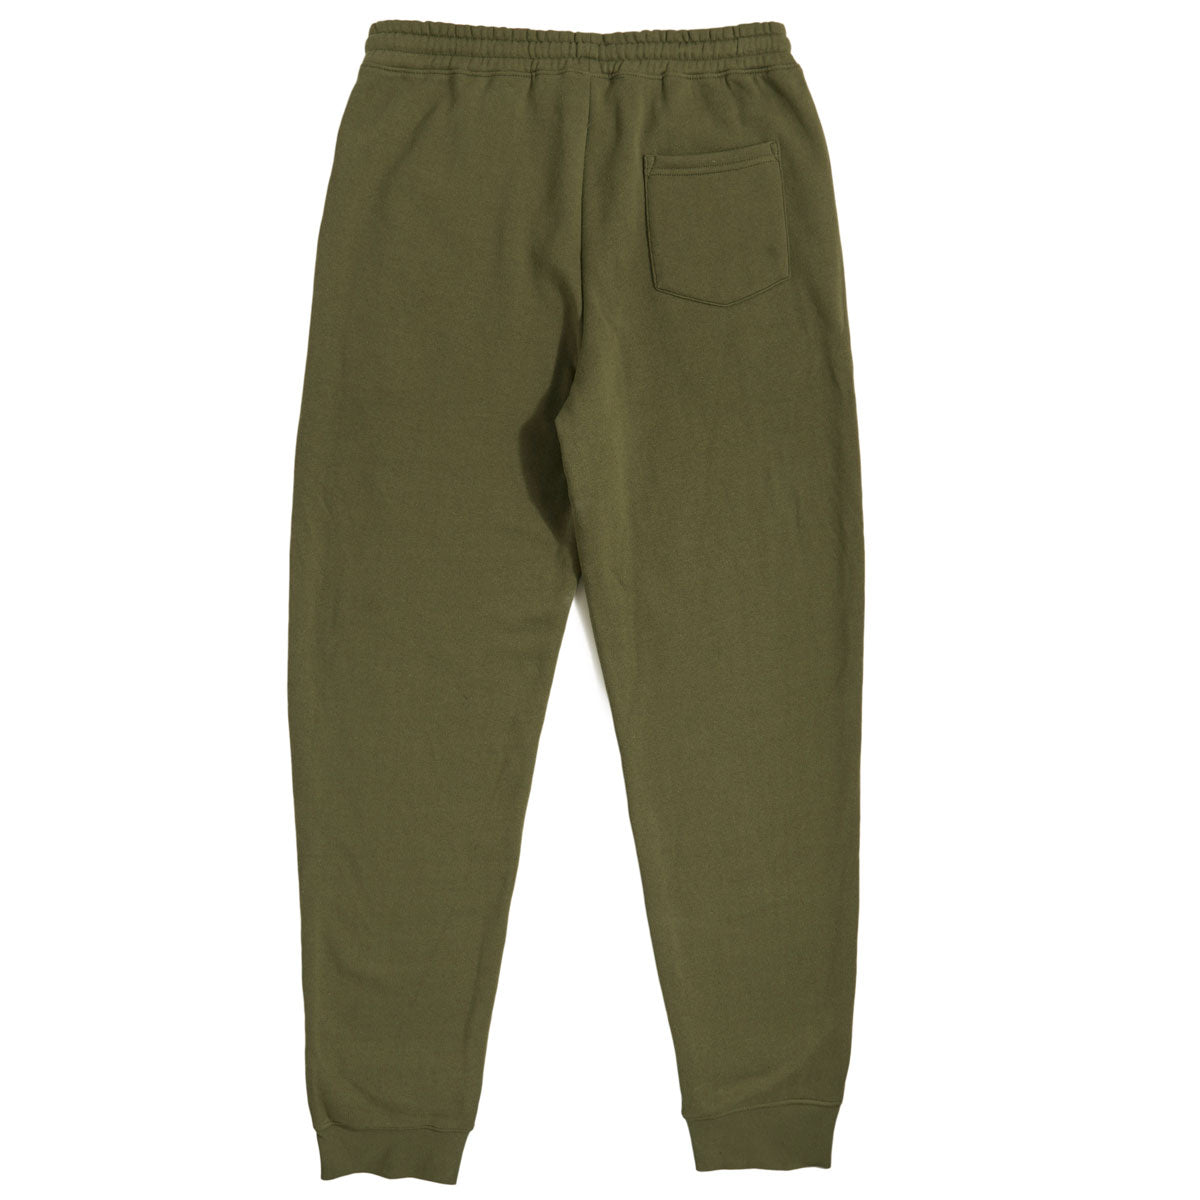 CCS Logo Rubber Patch Sweat Pants - Army Green image 4